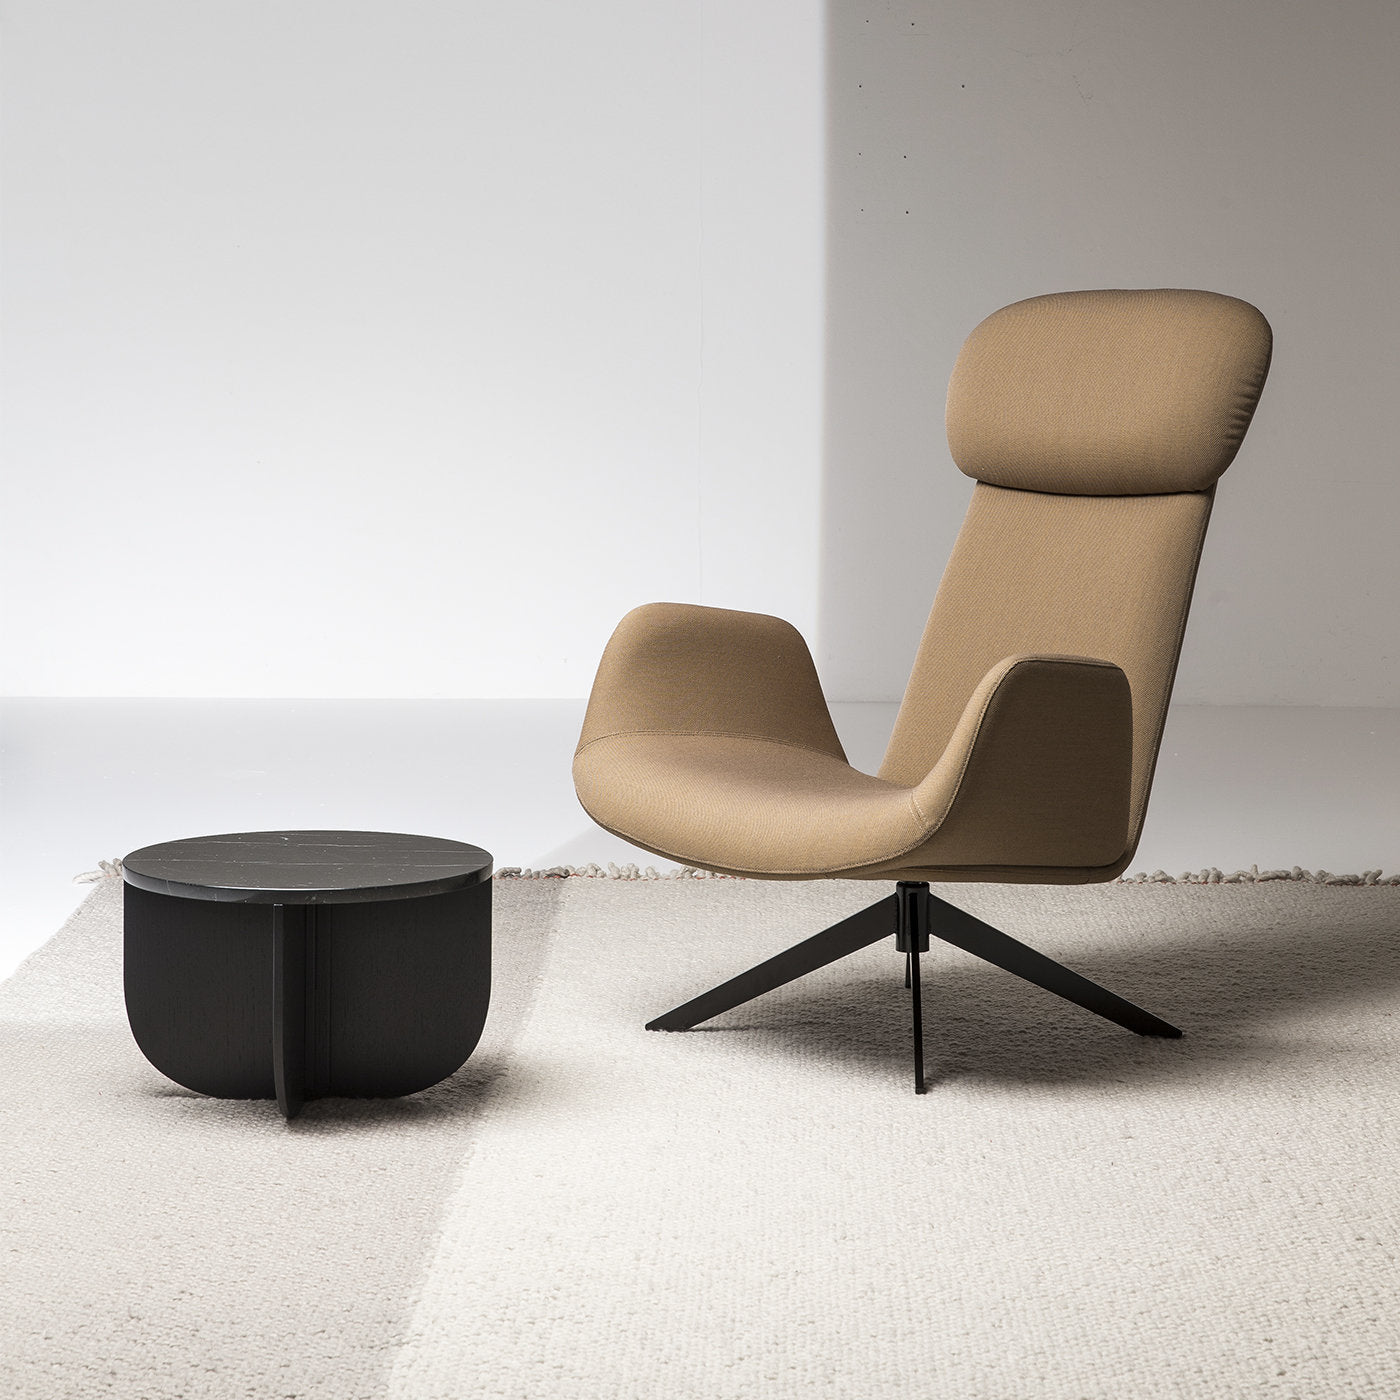 Myplace Armchair with Armrests and Headrest by Michael Geldmacher - Alternative view 1